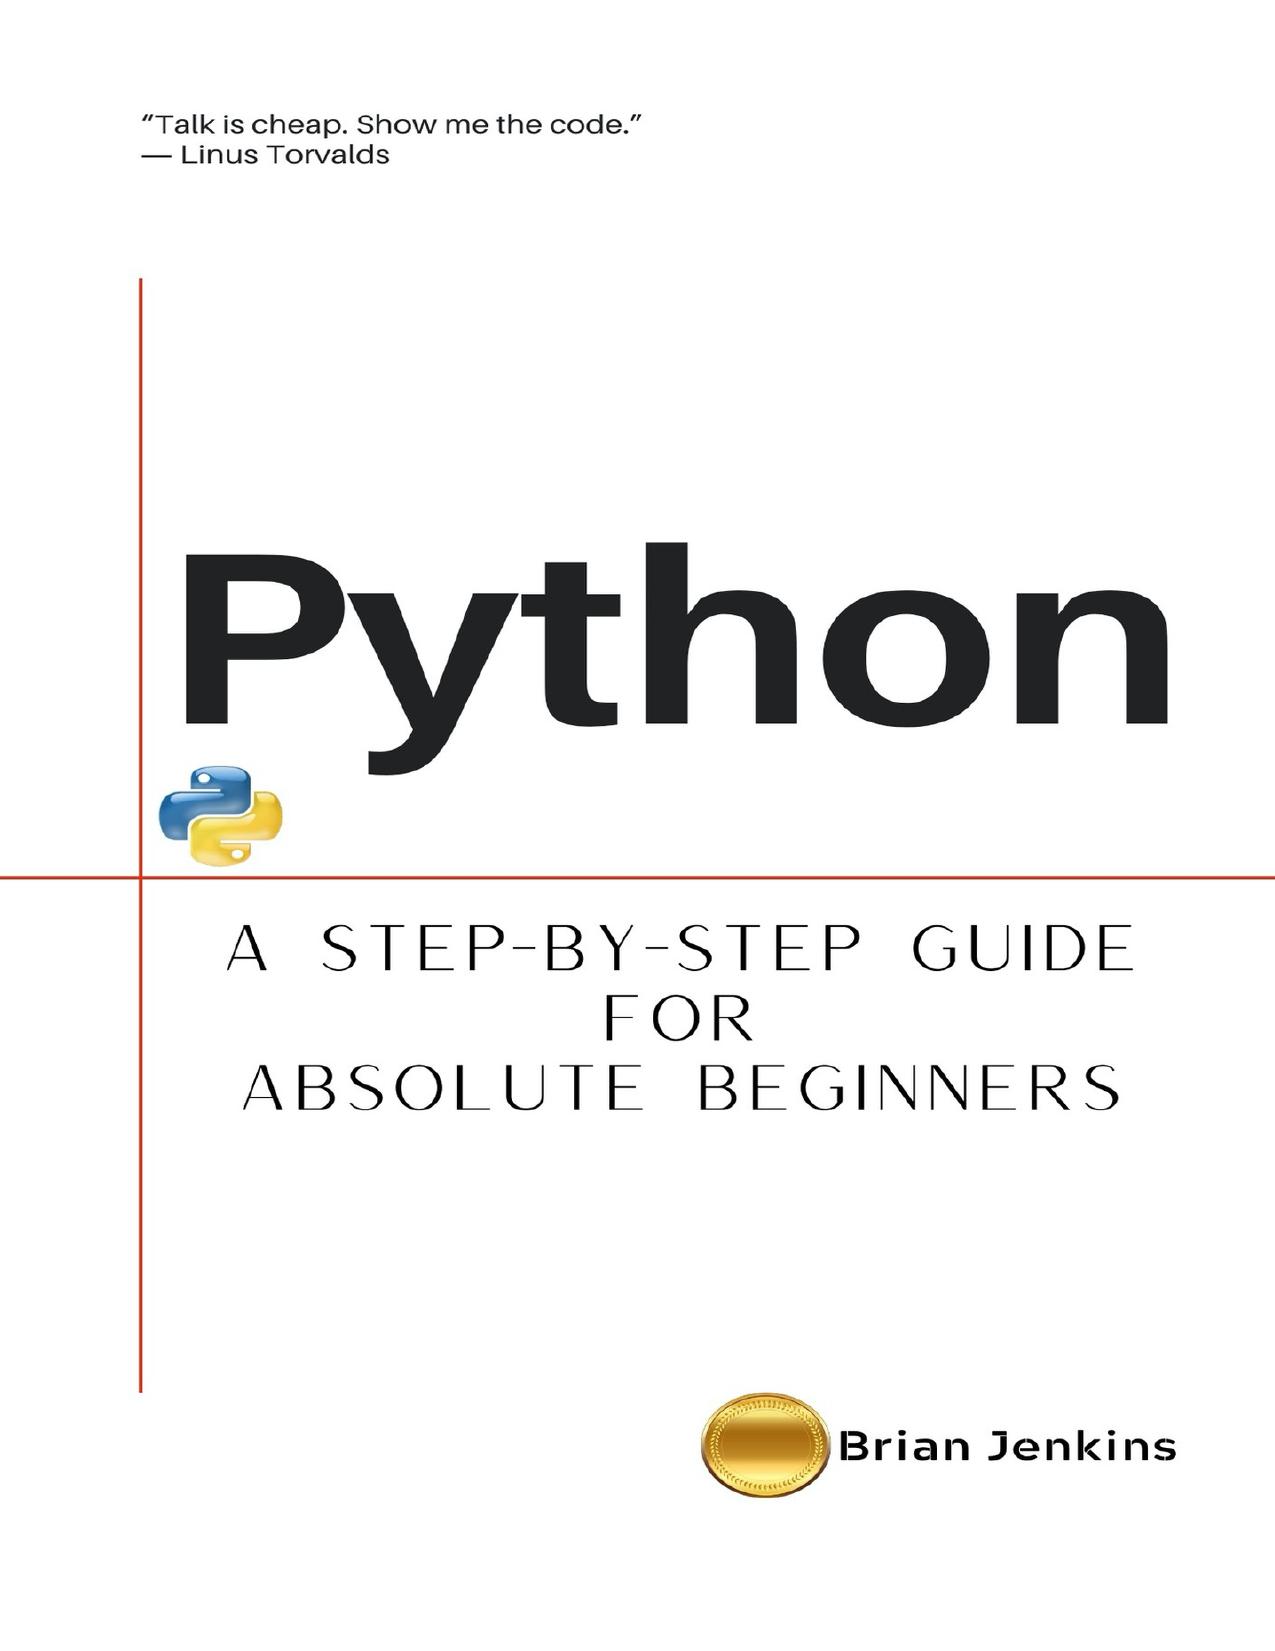 Python : A Step-by-Step Guide For Absolute Beginners by Brian Jenkins